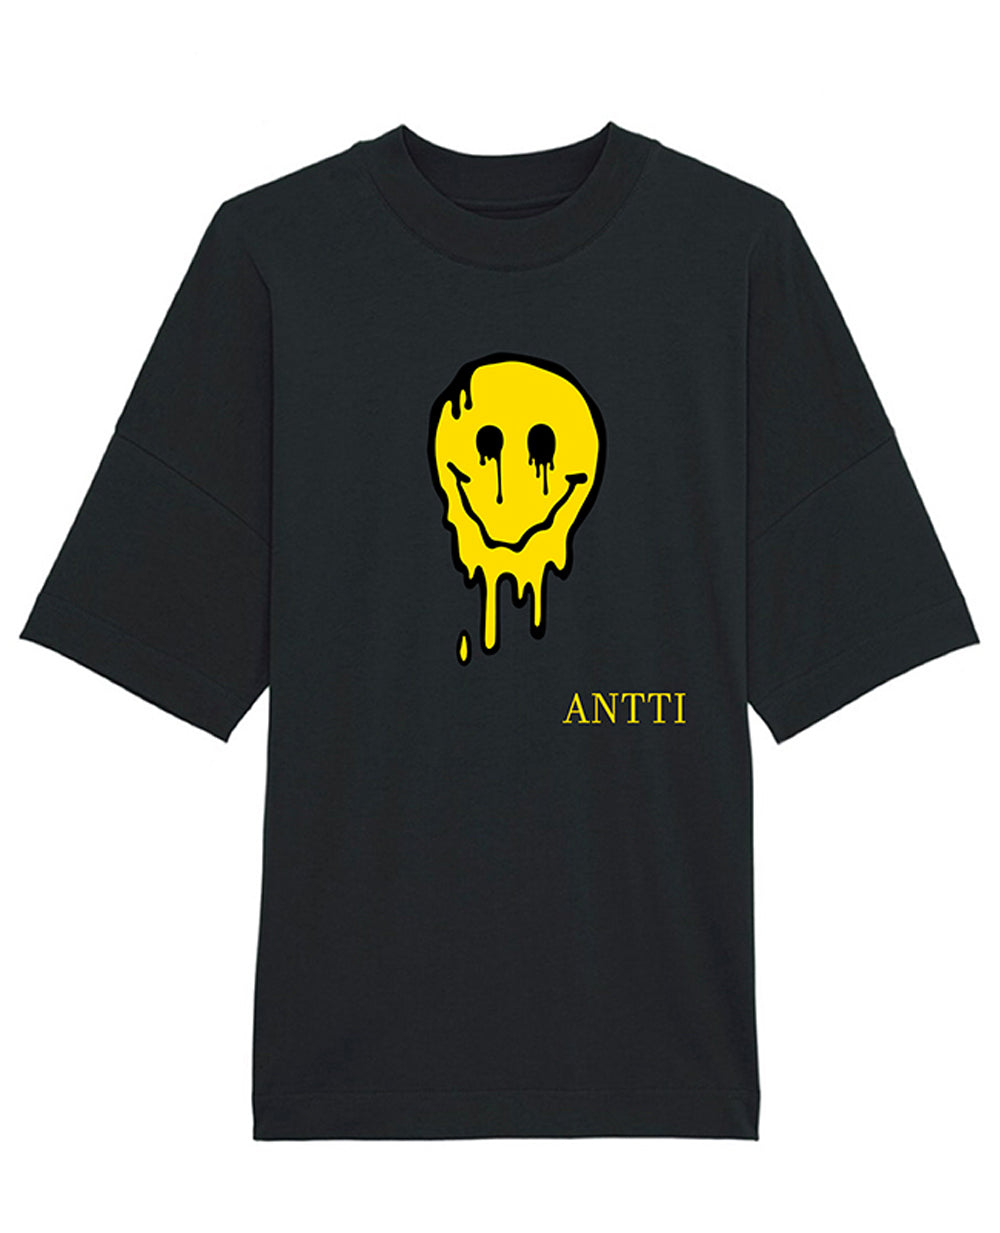 Dripping Smiley Face Oversize T-Shirt - Black